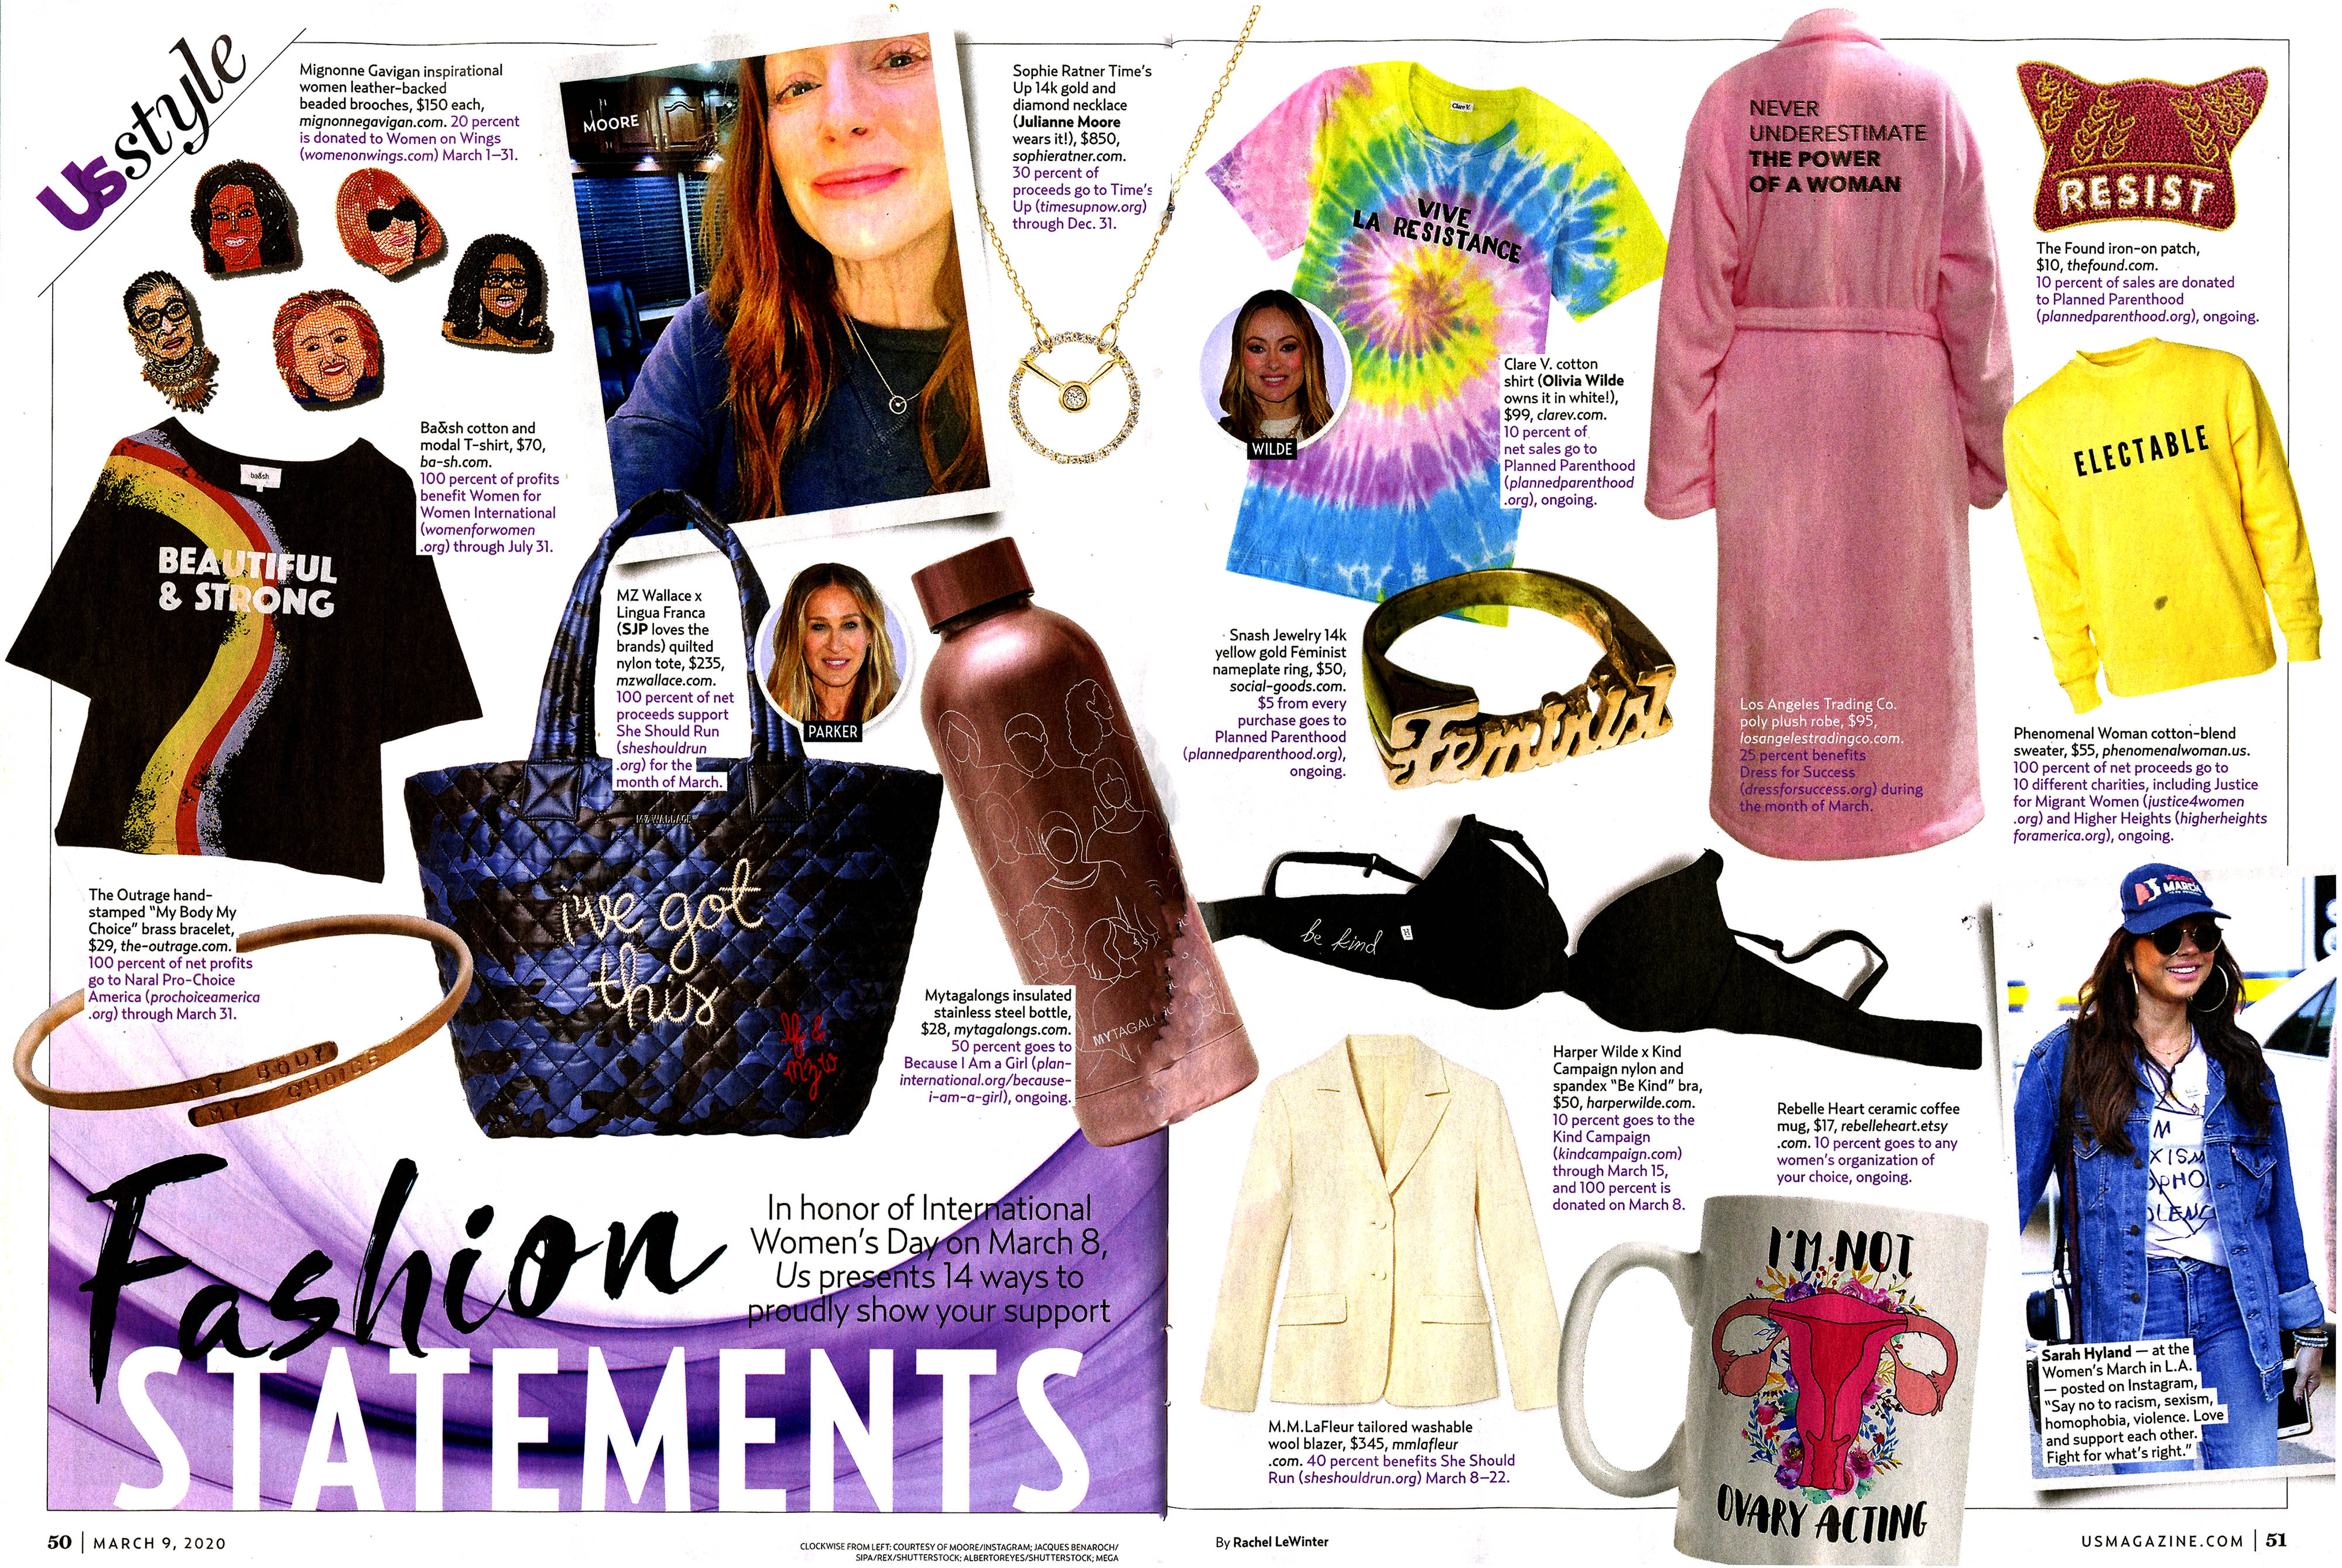 Page 50 of US Weekly's March 9, 2020 Issue Featuring Our Tie-Dye Vive La Resistance Tee as a Fashion Statement